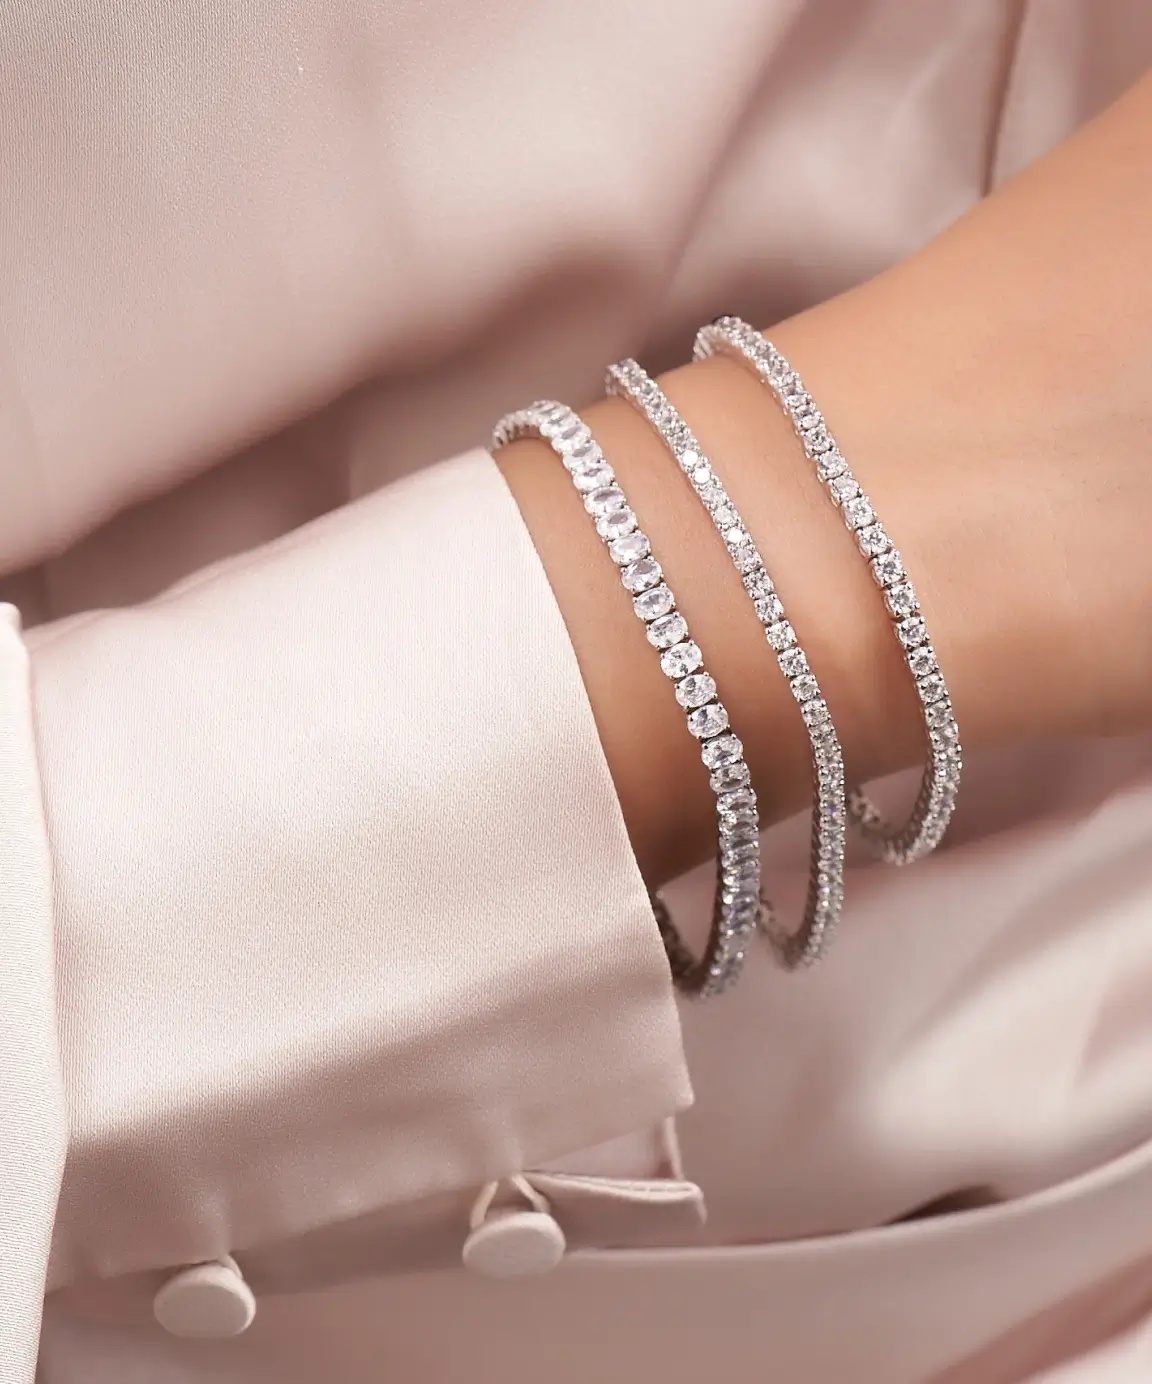 Find out the types of bracelet clasps and how to tie a bracelet yourse